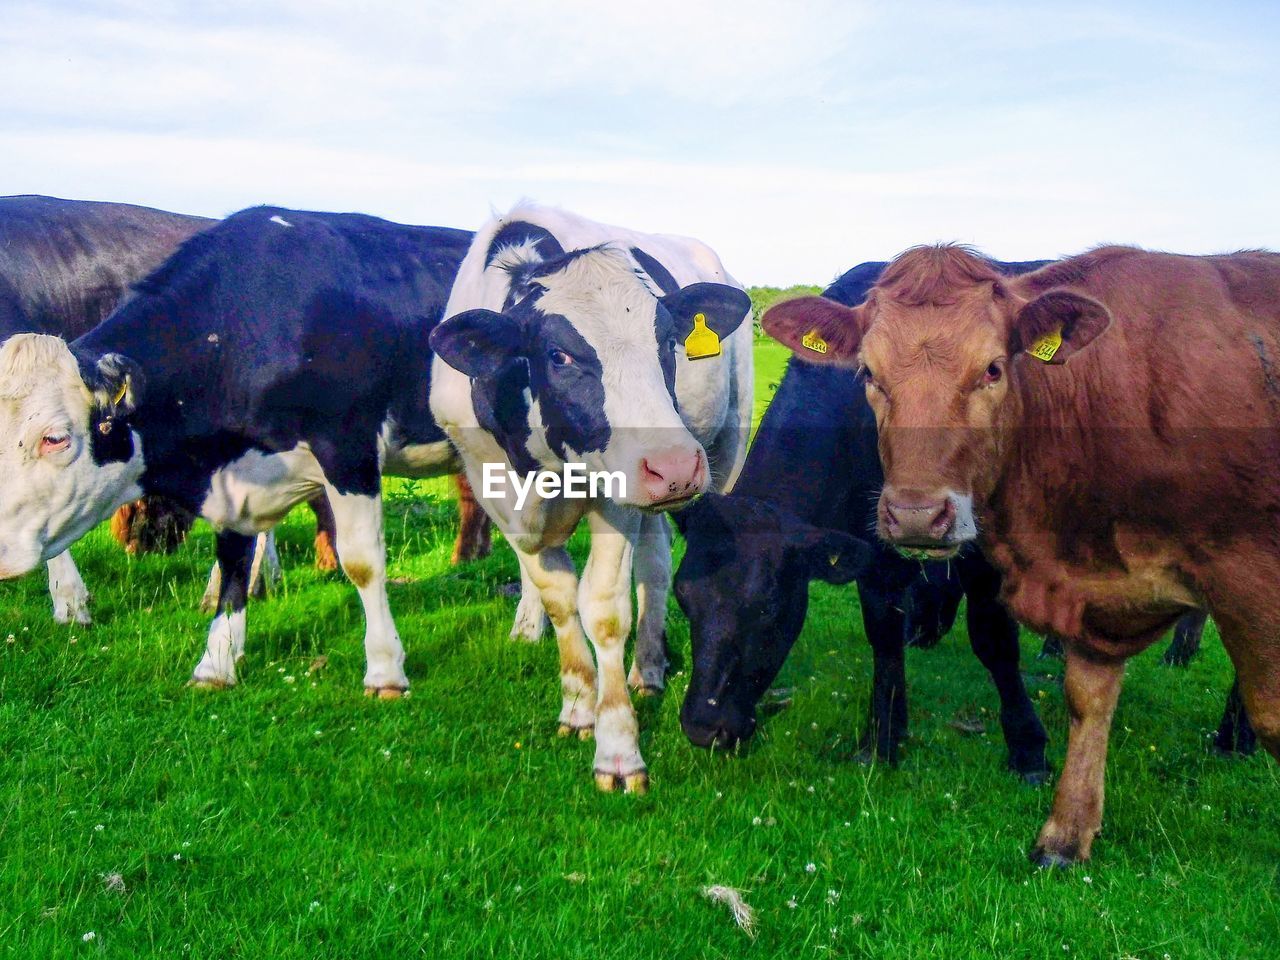 mammal, animal, animal themes, domestic animals, livestock, pasture, dairy cow, grass, group of animals, cattle, pet, cow, agriculture, plant, nature, field, land, landscape, grazing, farm, meadow, rural scene, no people, domestic cattle, grassland, environment, plain, sky, rural area, green, dairy farm, outdoors, day, cloud, animal wildlife, standing, livestock tag, herd, natural environment, medium group of animals, food, calf